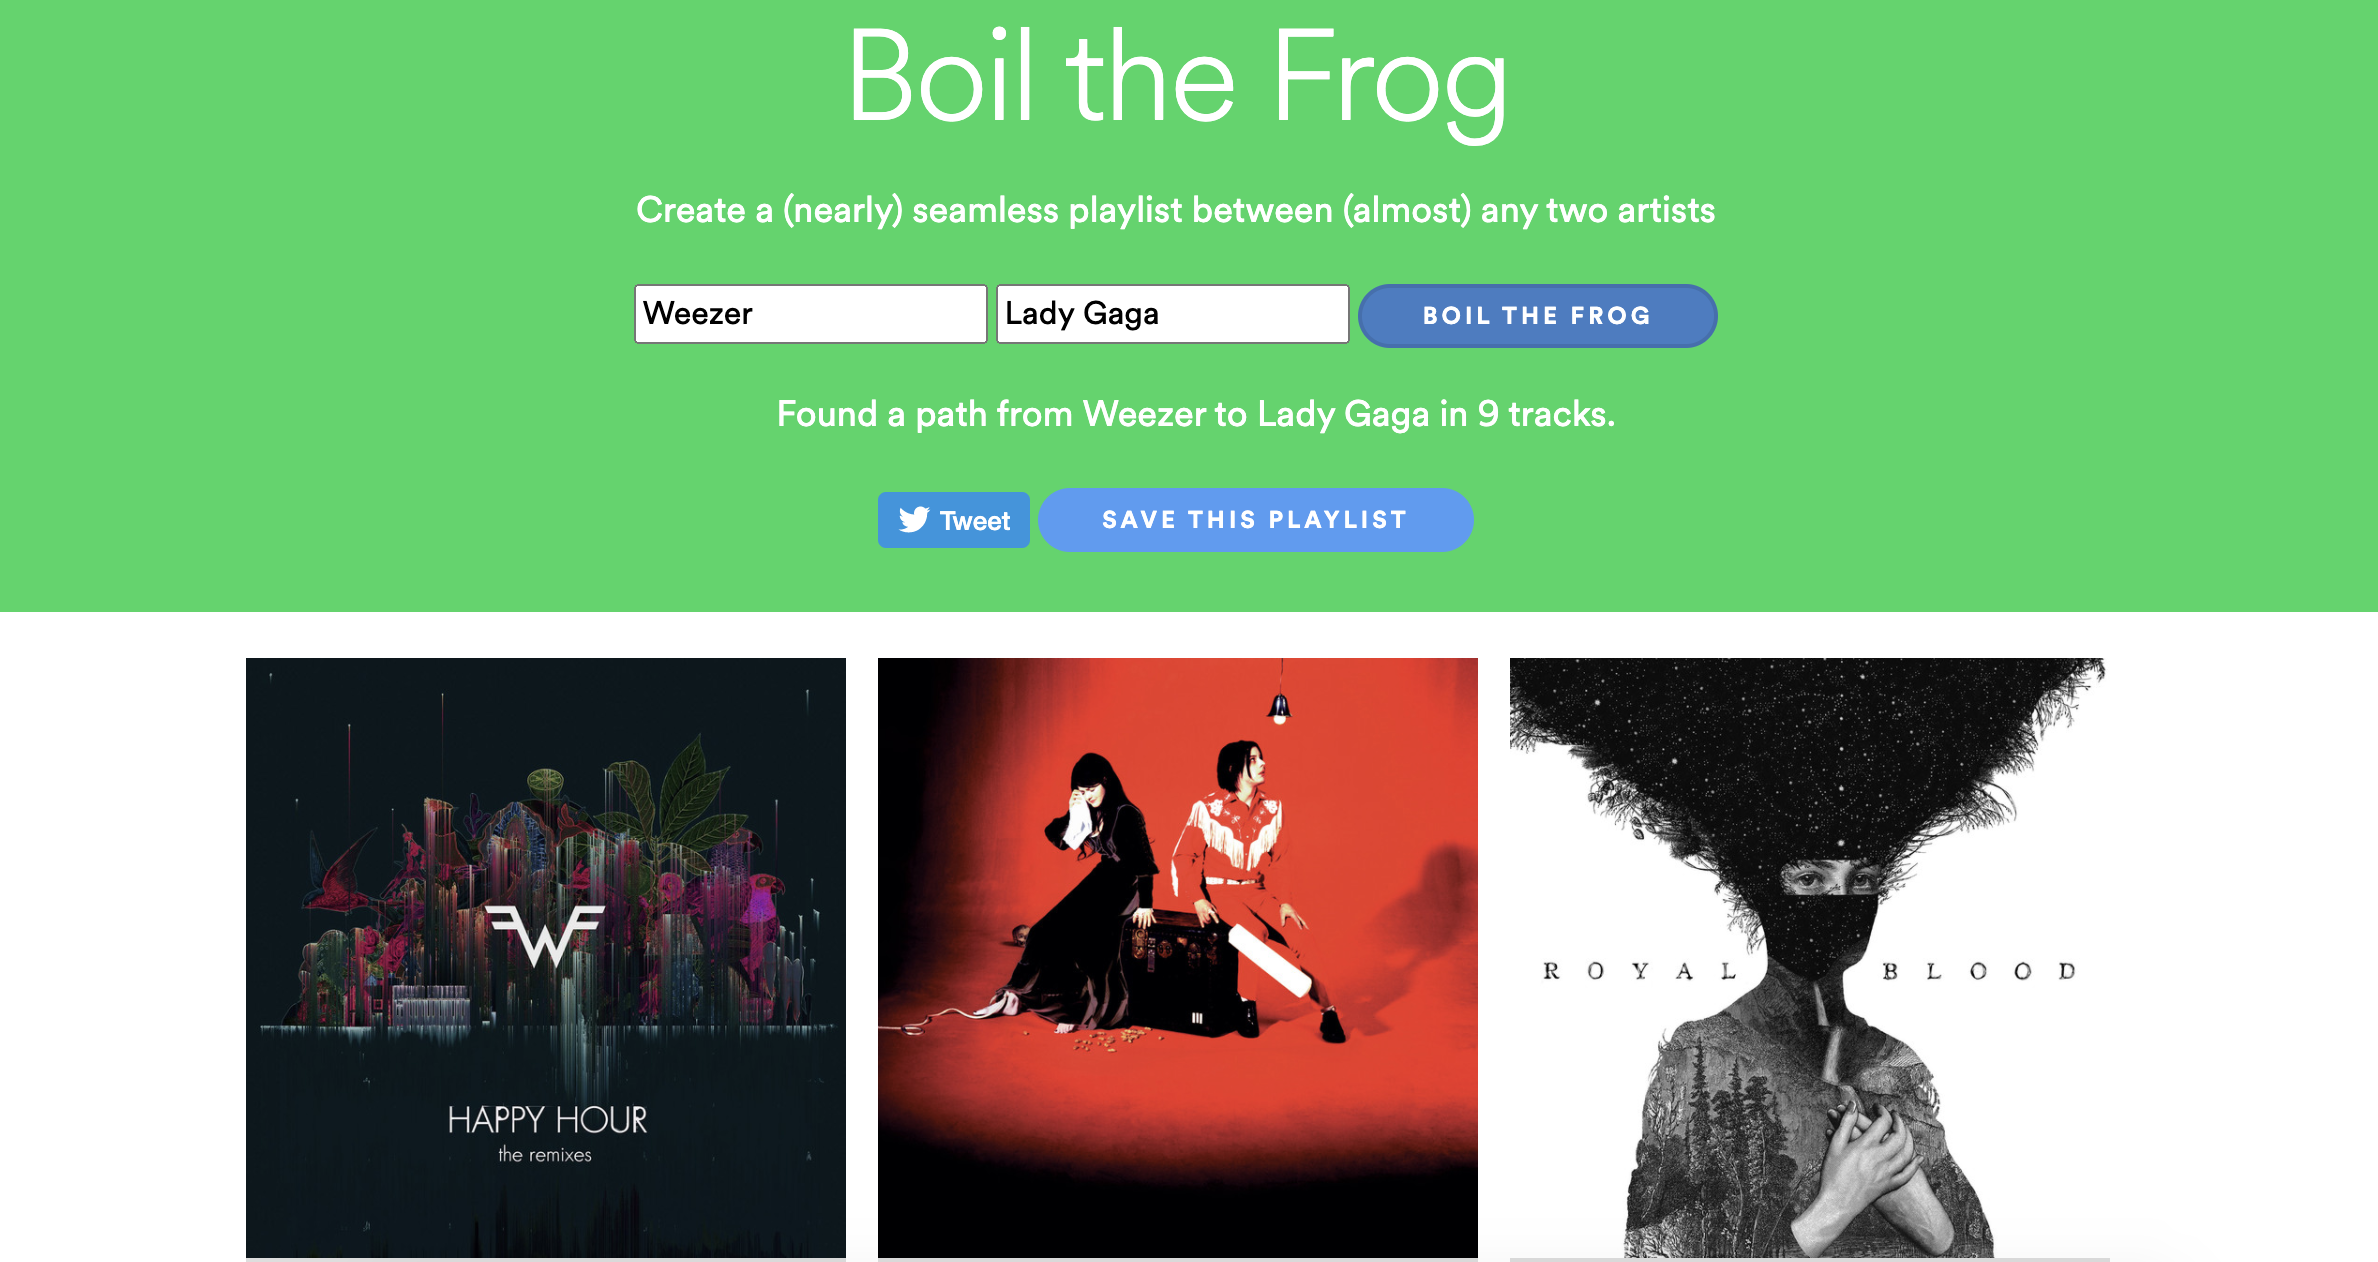 Weezer and Lady Gaga put in as the artists and a &quot;boil the frog&quot; button which gives a list of songs to connect them